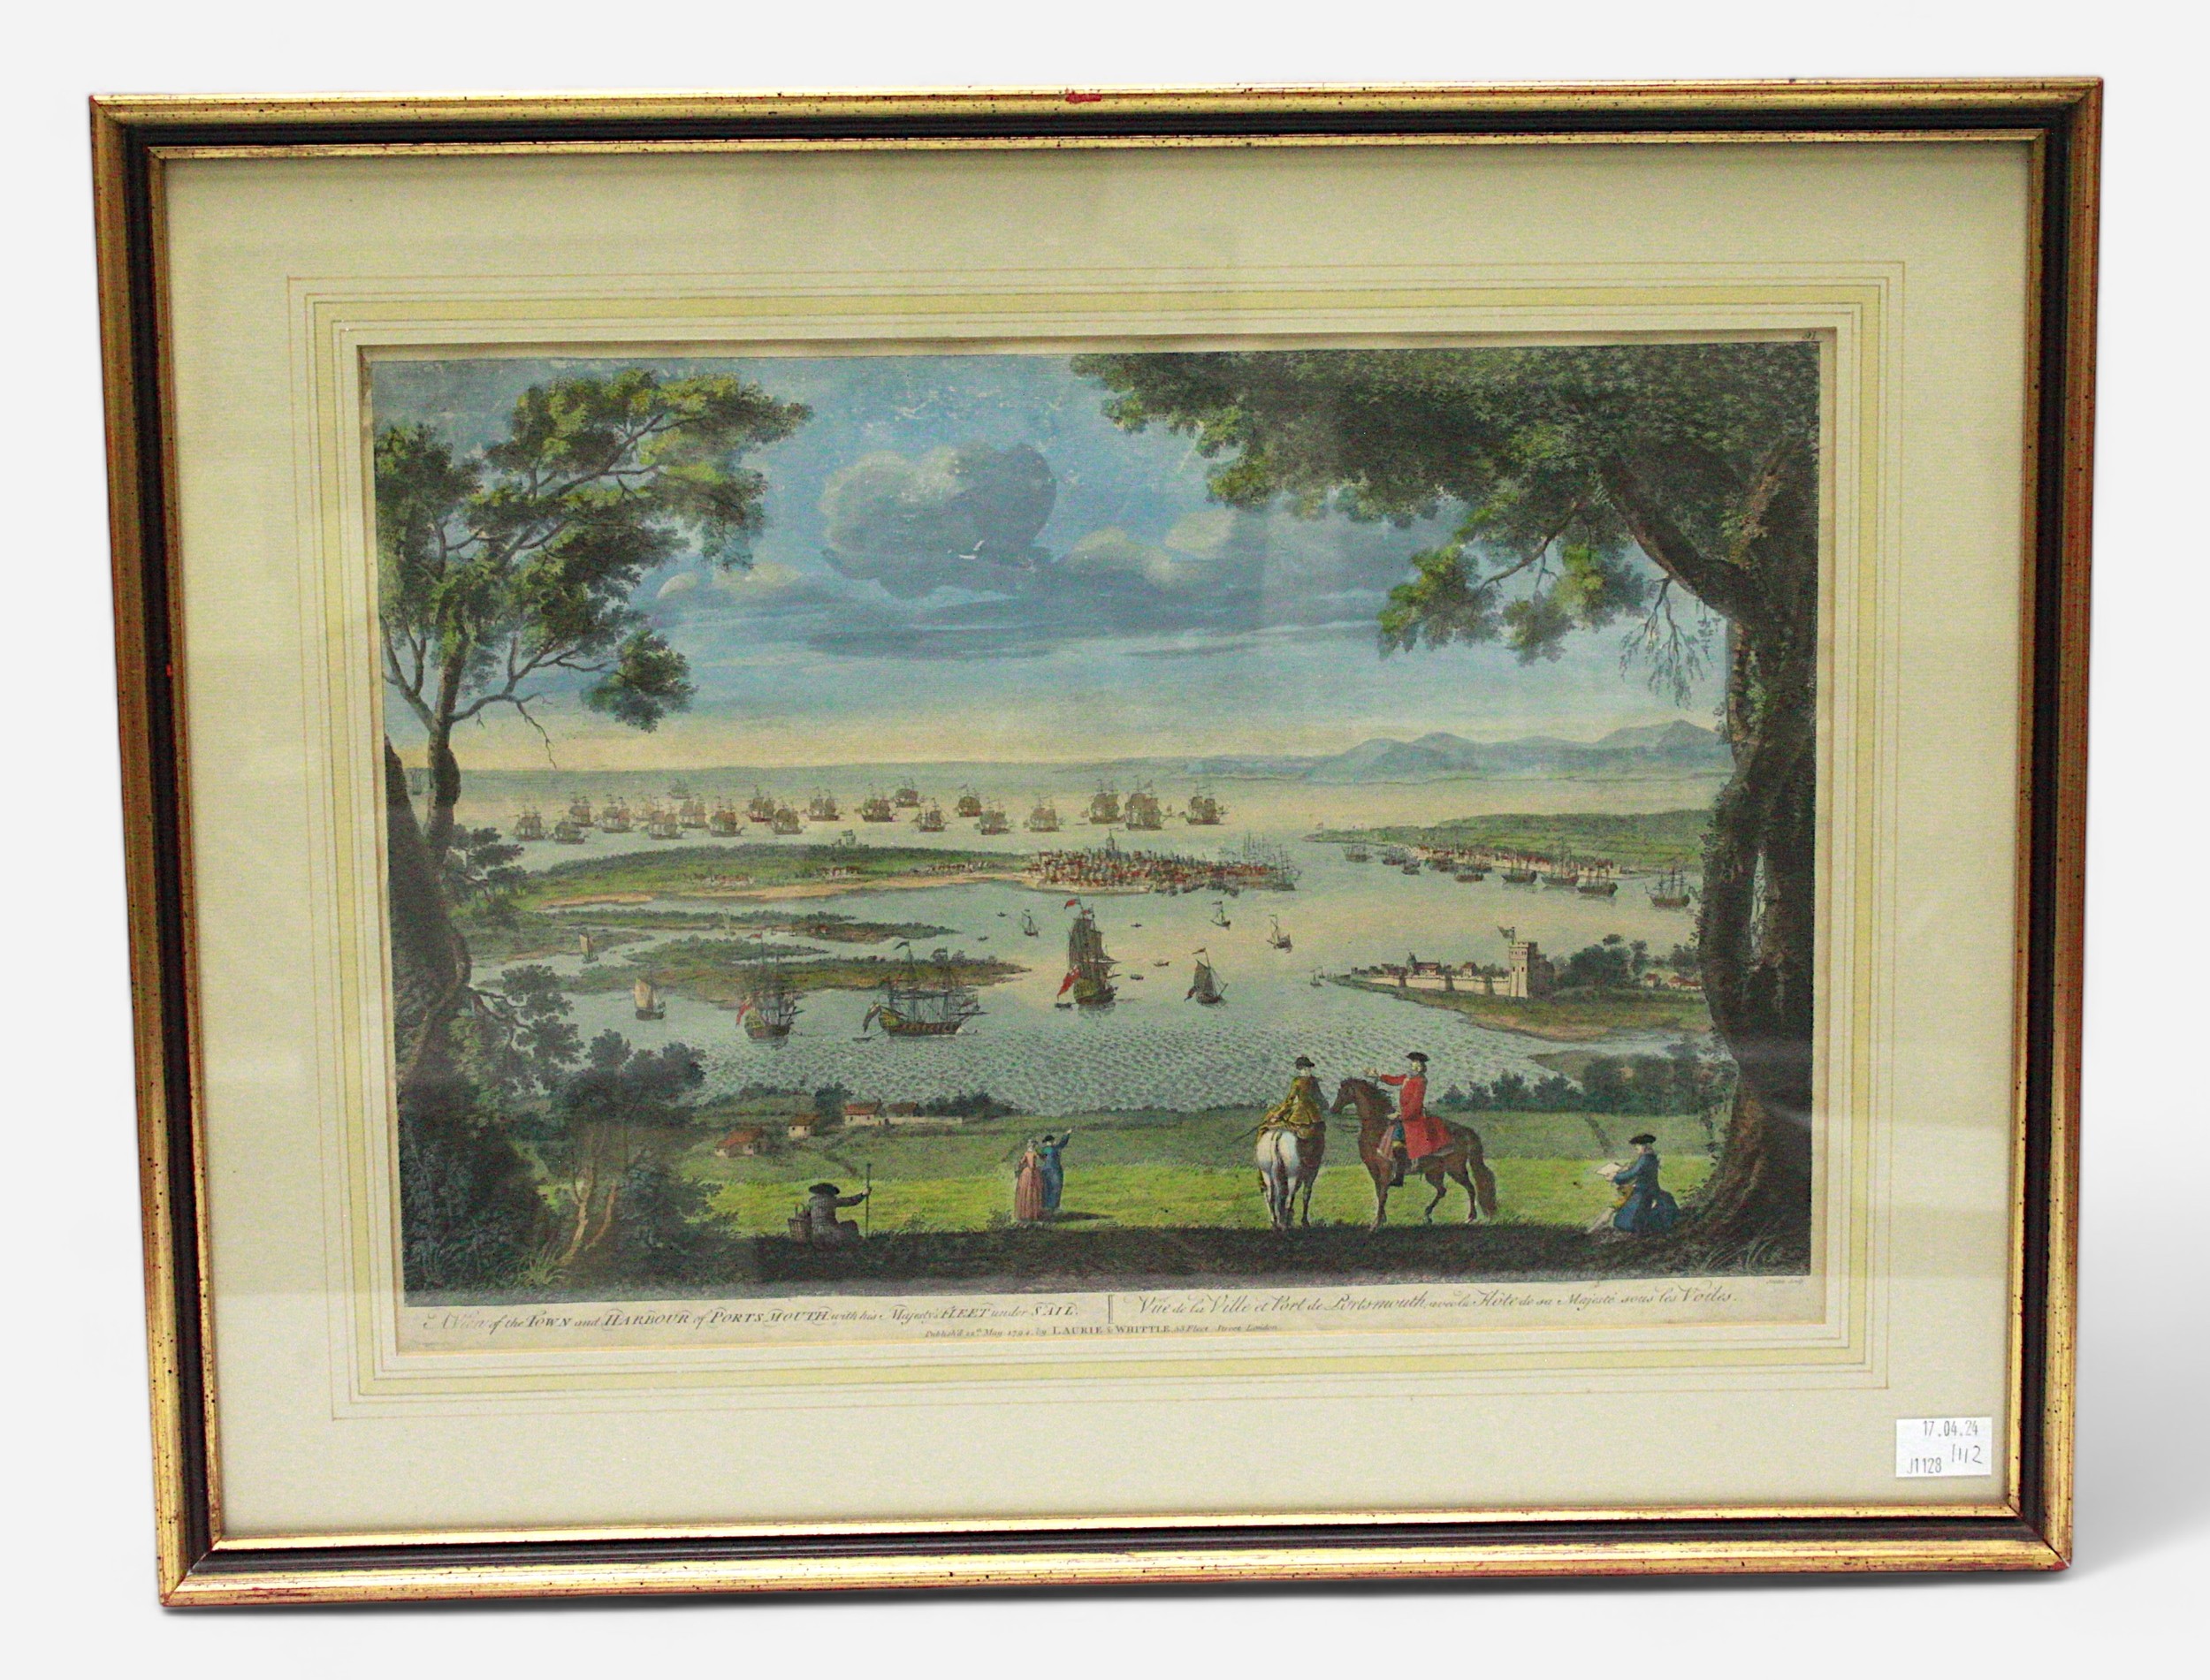 After A. Manageot, A late 18th Century hand-coloured engraved print, ‘A view of the Town and Harbour